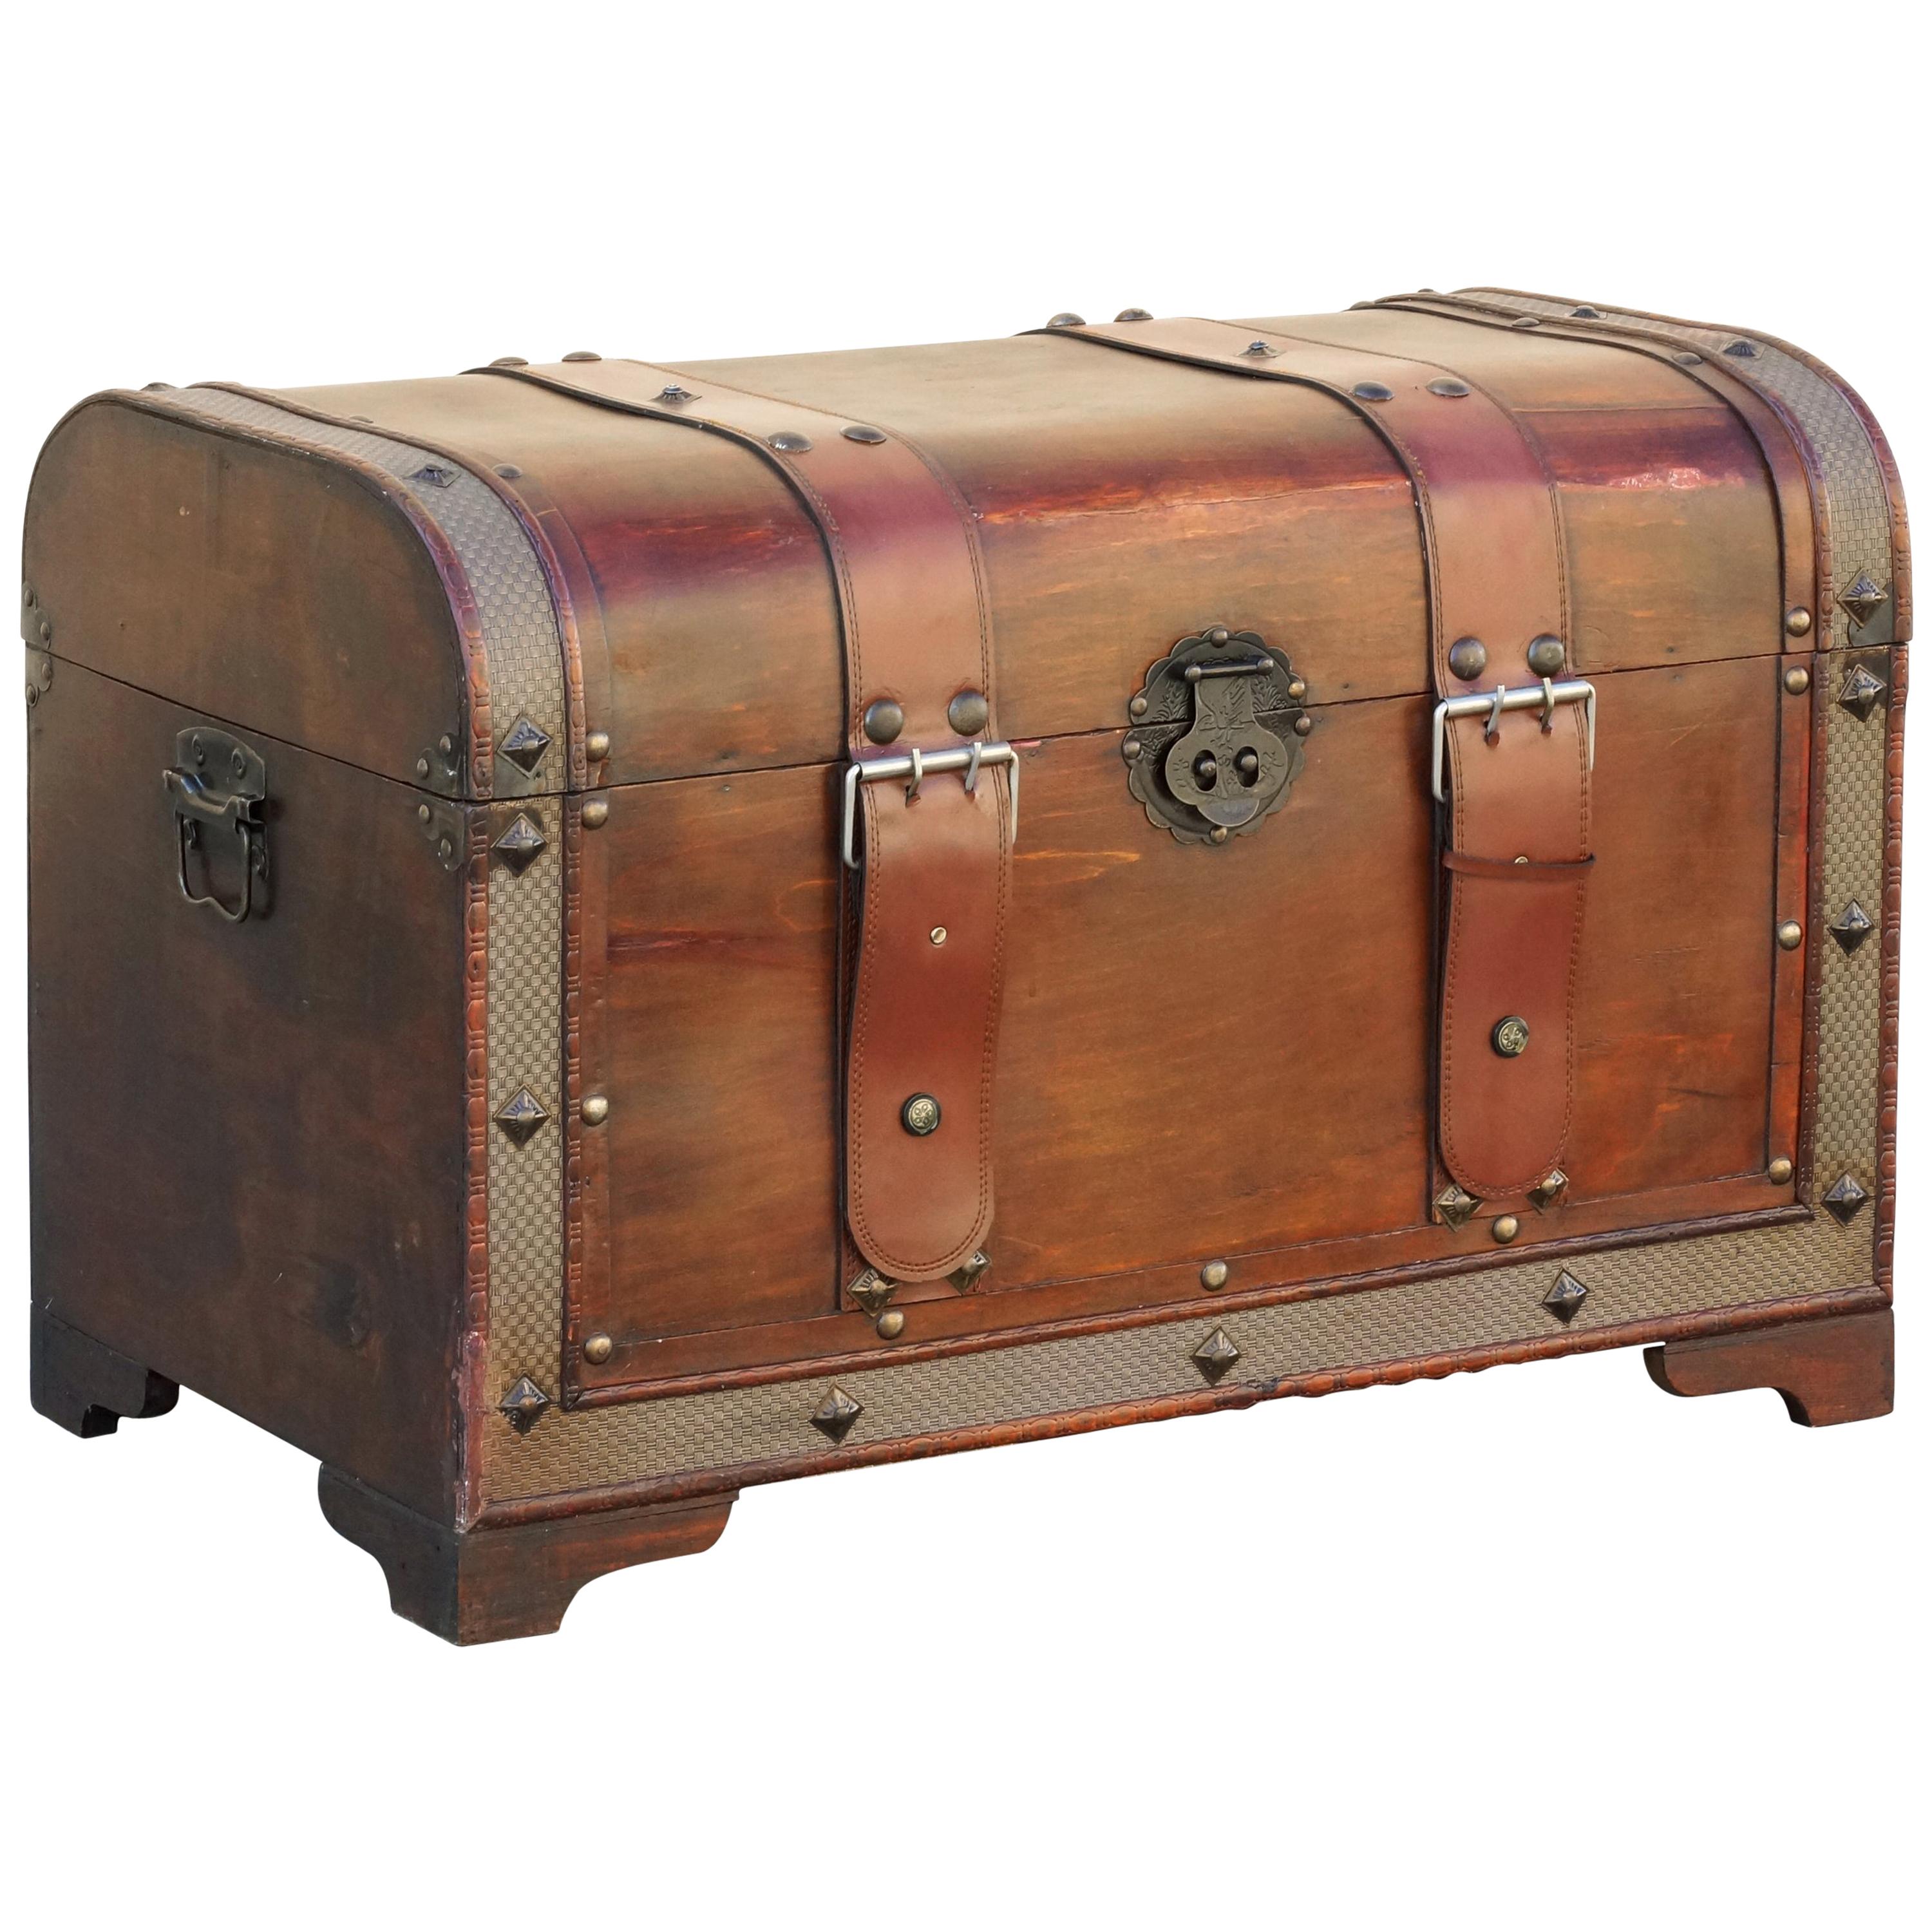 Straps Trunk - Art of Living - Trunks and Travel